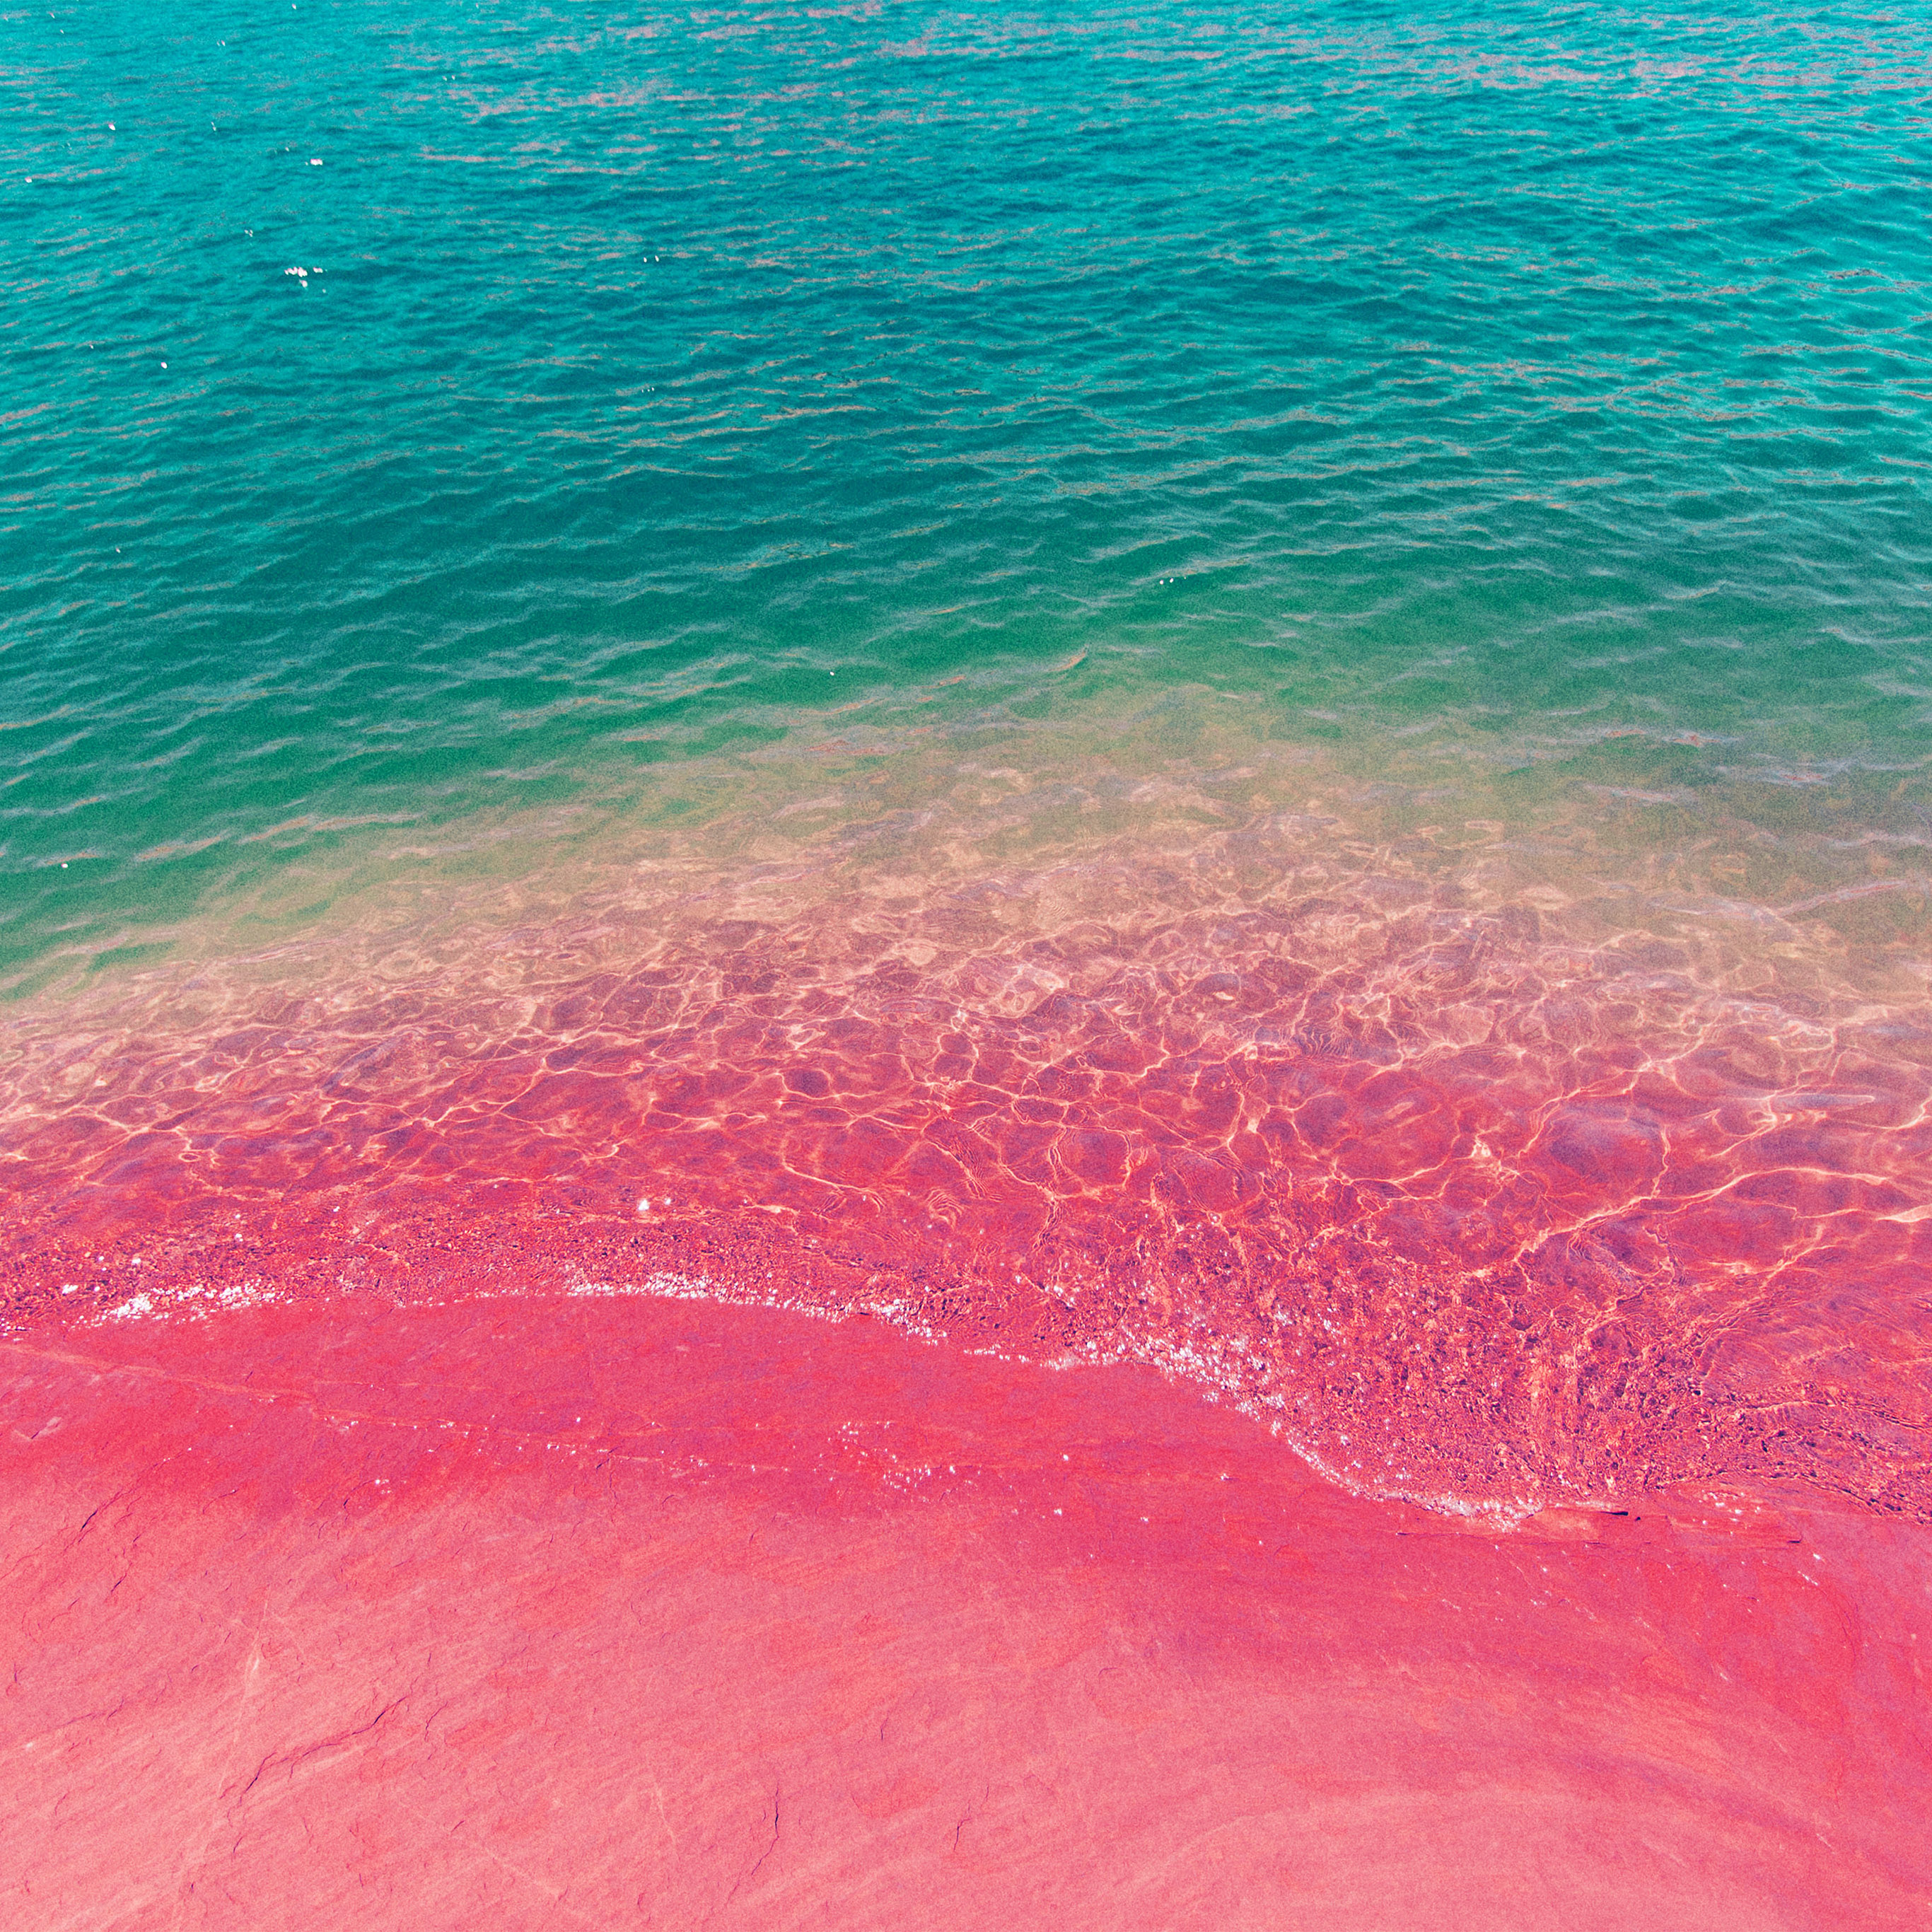 Android wallpaper. sea water beach summer nature pink